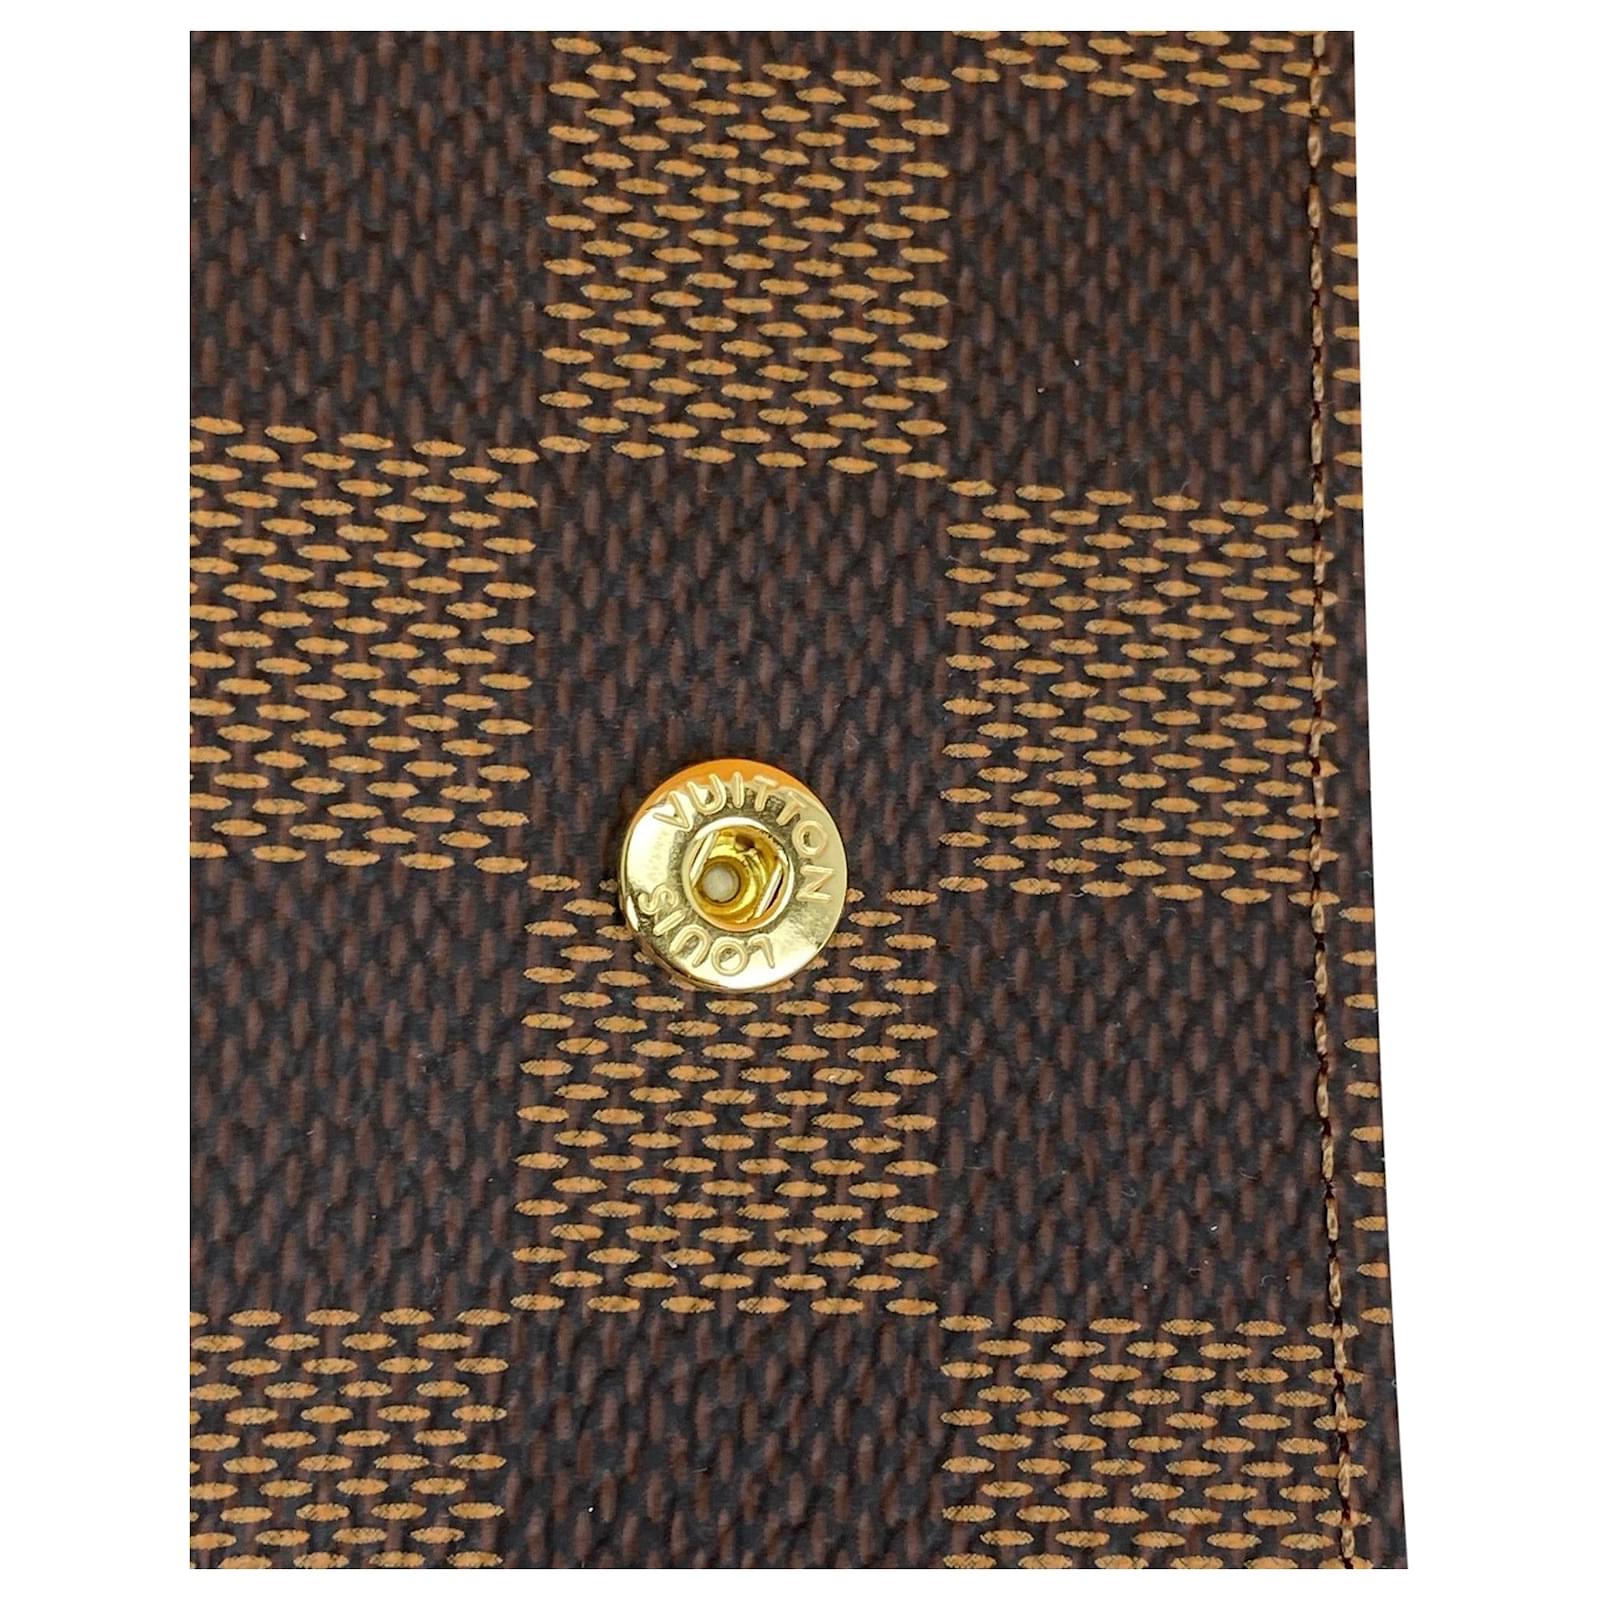 Louis Vuitton 6 Key Holder Damier Ebene Brown in Coated Canvas